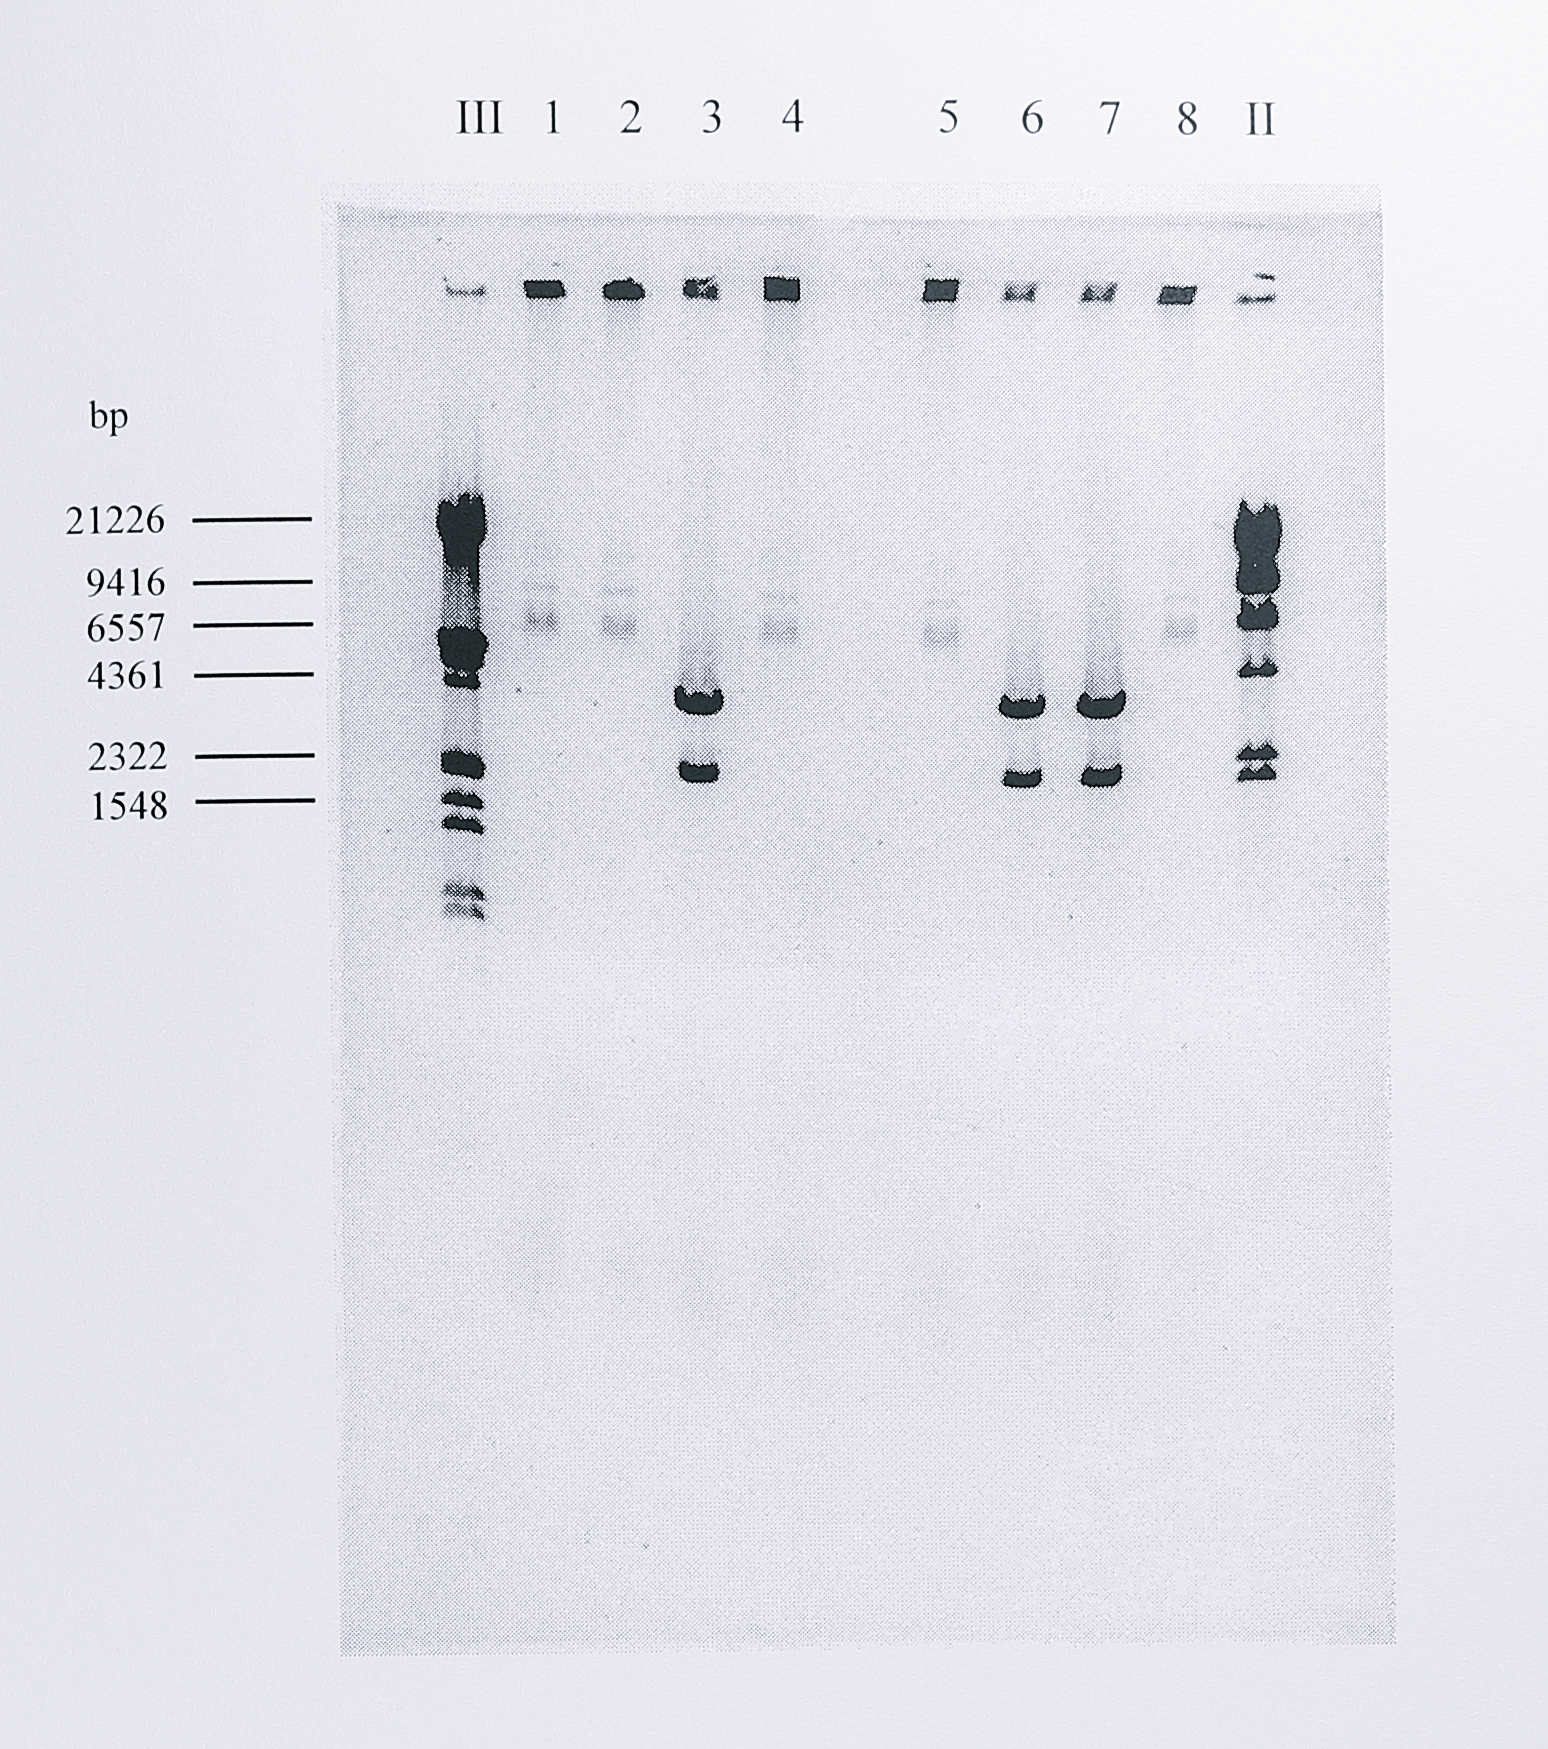 Restriction digests illustrating the problem of vector carryover during cloning of the _T. pantotropha_ _nirS_ gene into pMMB67EH. A 2.4 kbp _PstI-SphI_ fragment of pBNIR was isolated and used in a ligation reaction with pMMB67EH, also digested with _PstI-SphI_. _E. coli_ JM83 was then transformed with the ligation mix and ampicillin resistant clones screened for the presence of the desired plasmid by restriction digests using _PstI_ plus _SphI_ and electrophoresis on a 0.8% agarose gel. However, in this case, all the plasmids recovered are either the original pBNIR plasmid (lanes 3, 6 and 7) or the pMMB67EH plasmid (lanes 1, 2, 4, 5 and 8) that has re-ligated due to incomplete digestion. Solutions to the problem are described in the text. The gel is displayed as a negative image to show faint bands more clearly. Lanes labelled III and II contain DNA size standards, the sizes of some of which are indicated at the left of the gel.